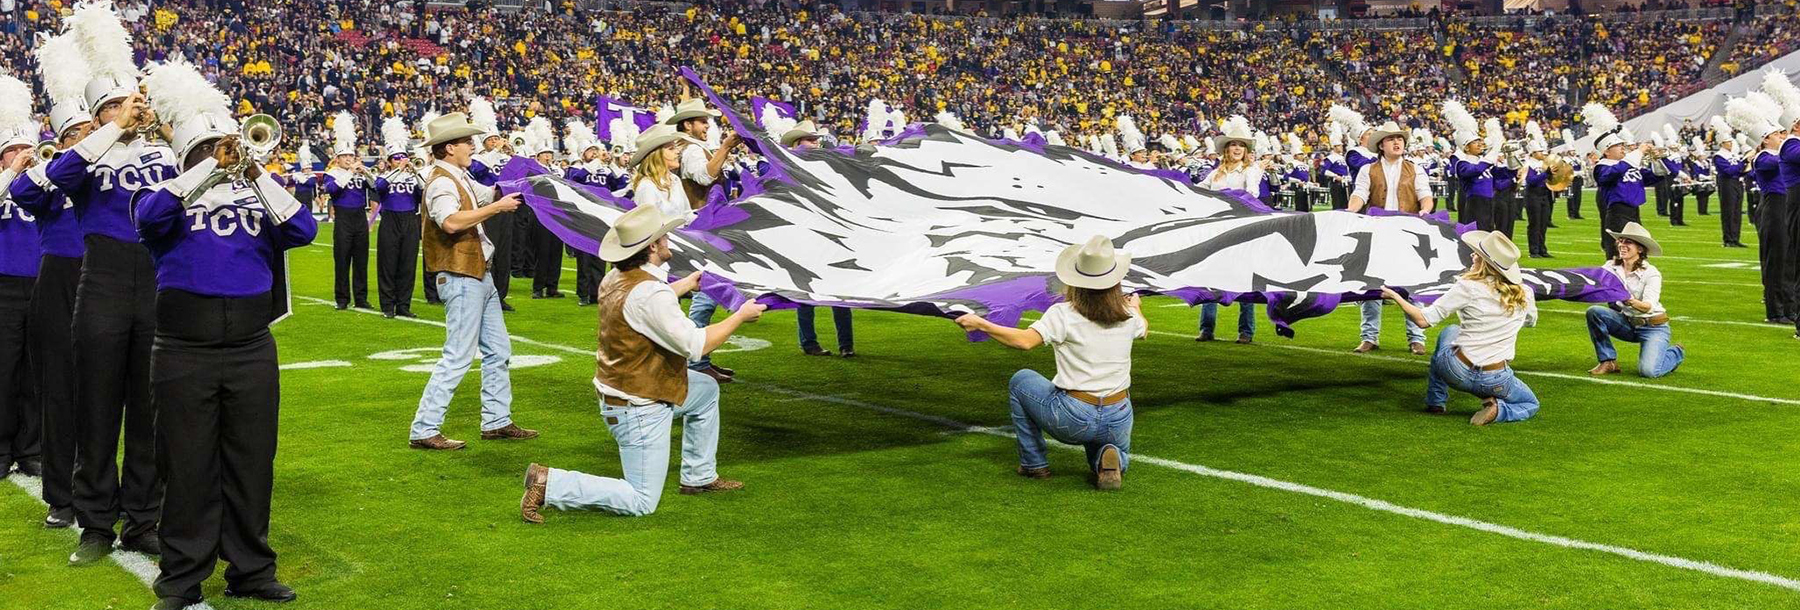 Section Image: Rangers with the Frog Flag on the field with the TCU band 